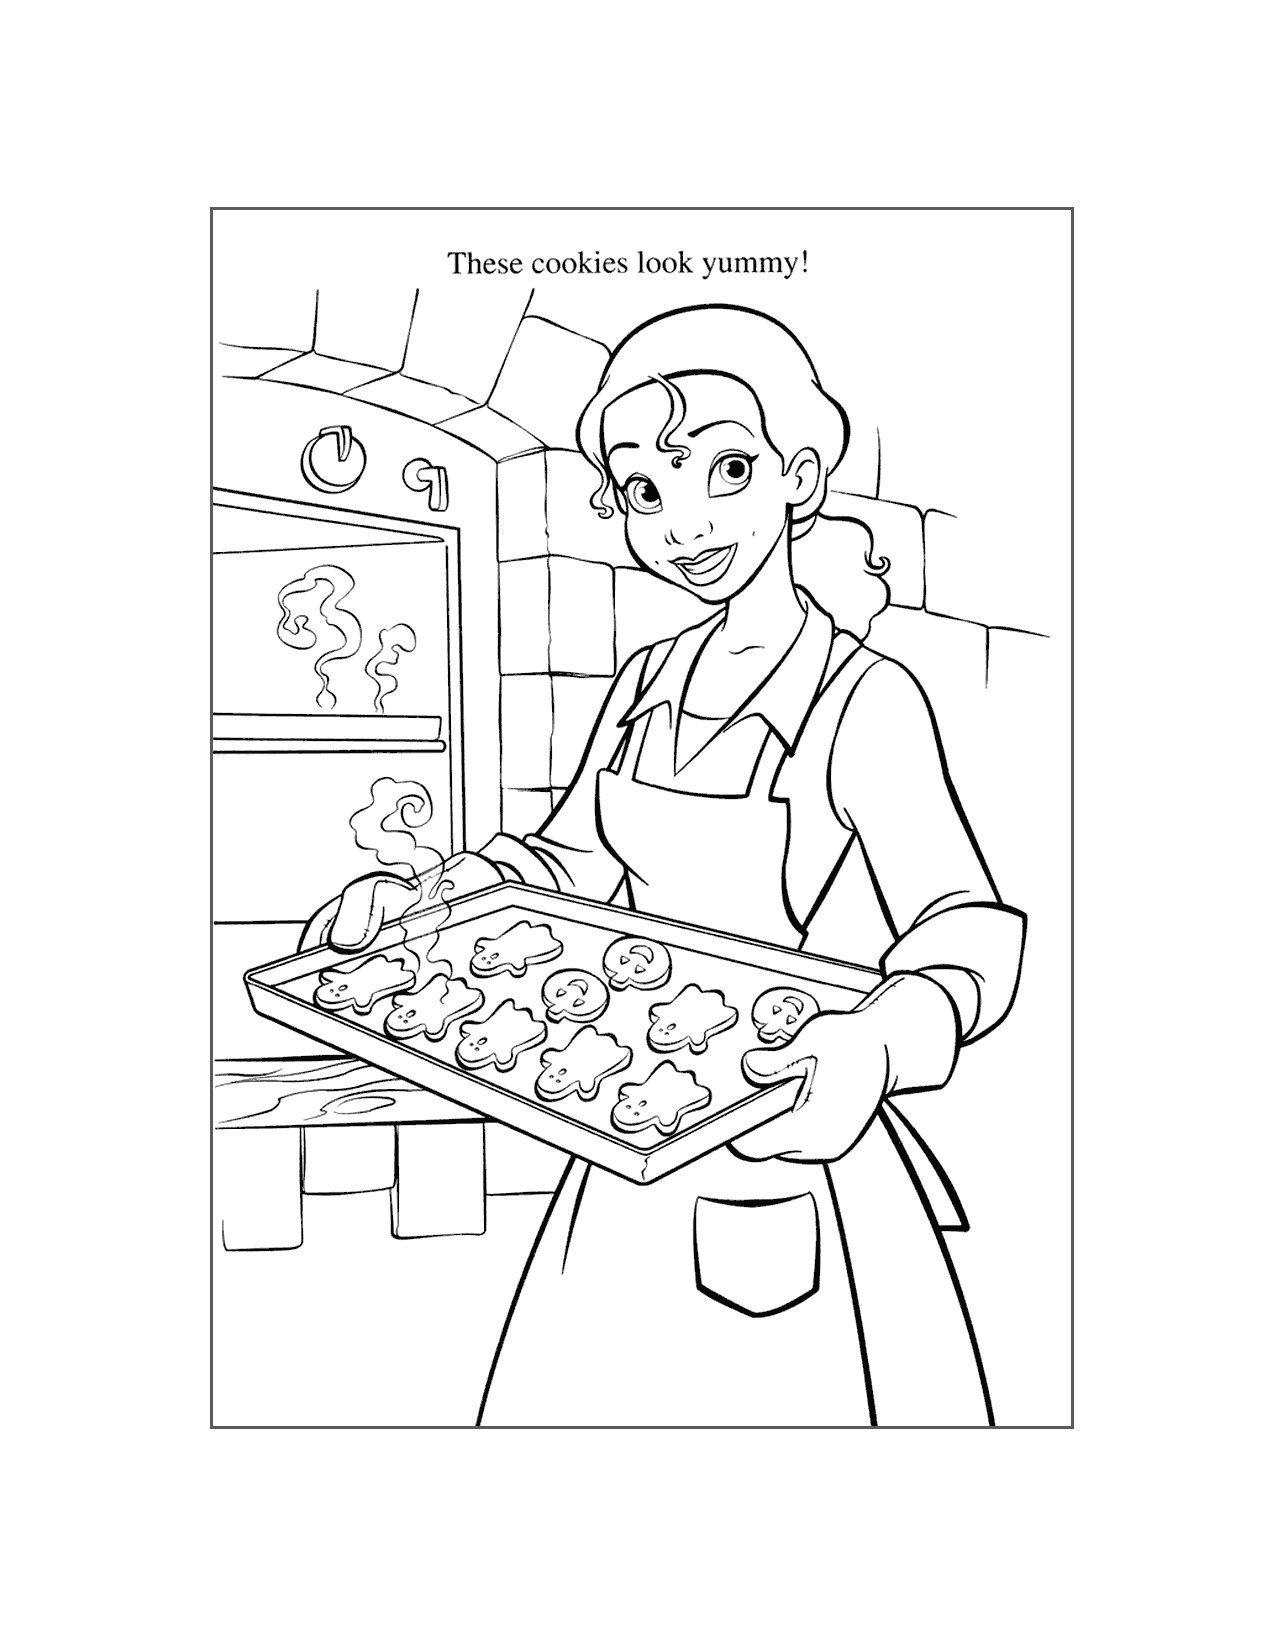 Tiana Makes Cookies Coloring Page